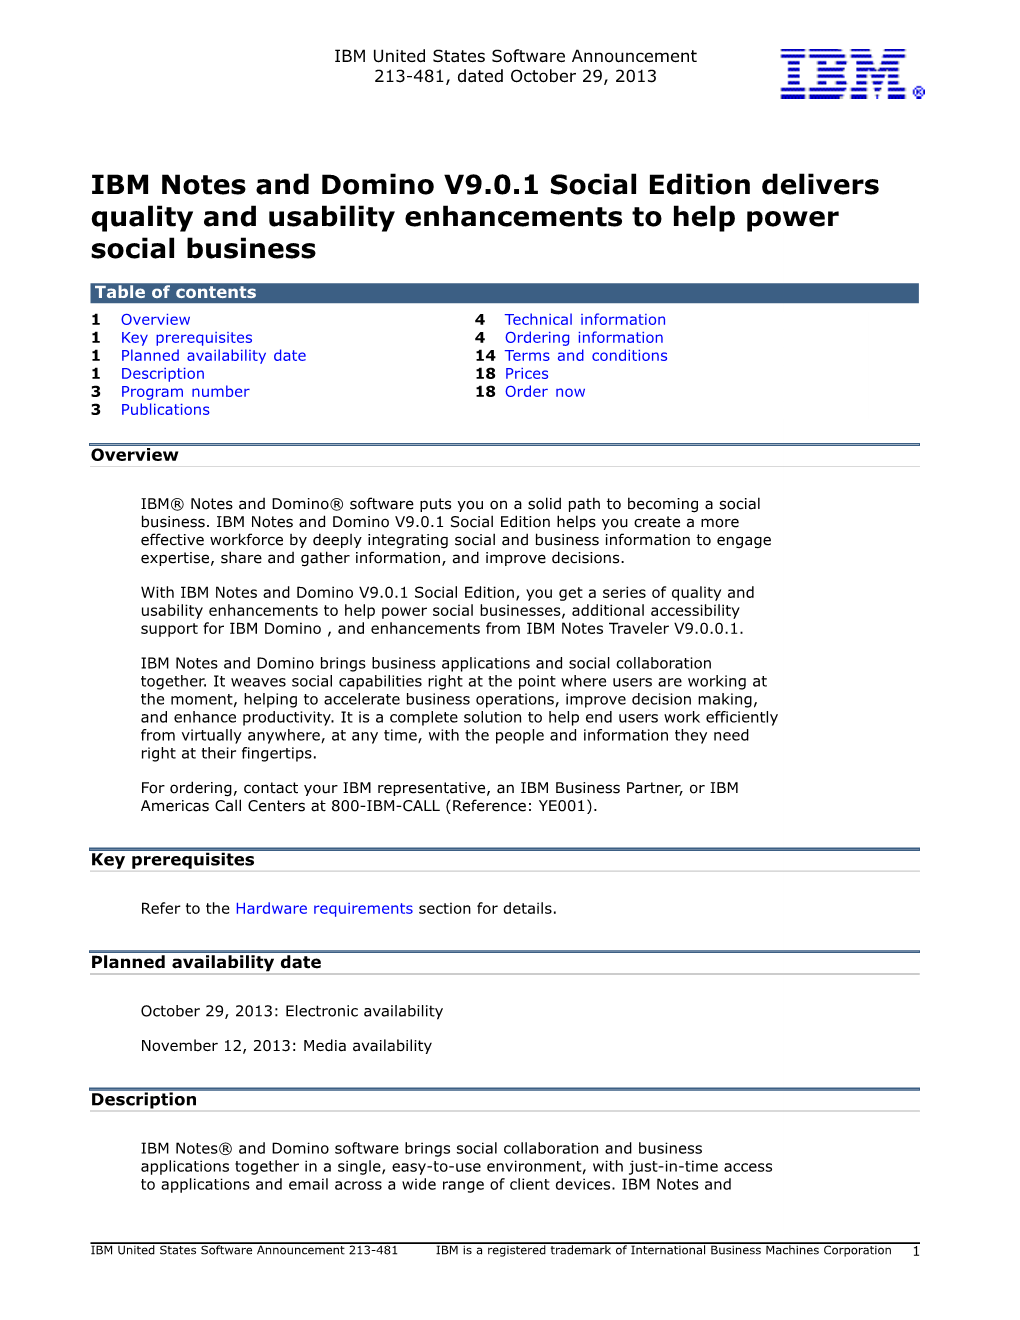 IBM Notes and Domino V9.0.1 Social Edition Delivers Quality and Usability Enhancements to Help Power Social Business